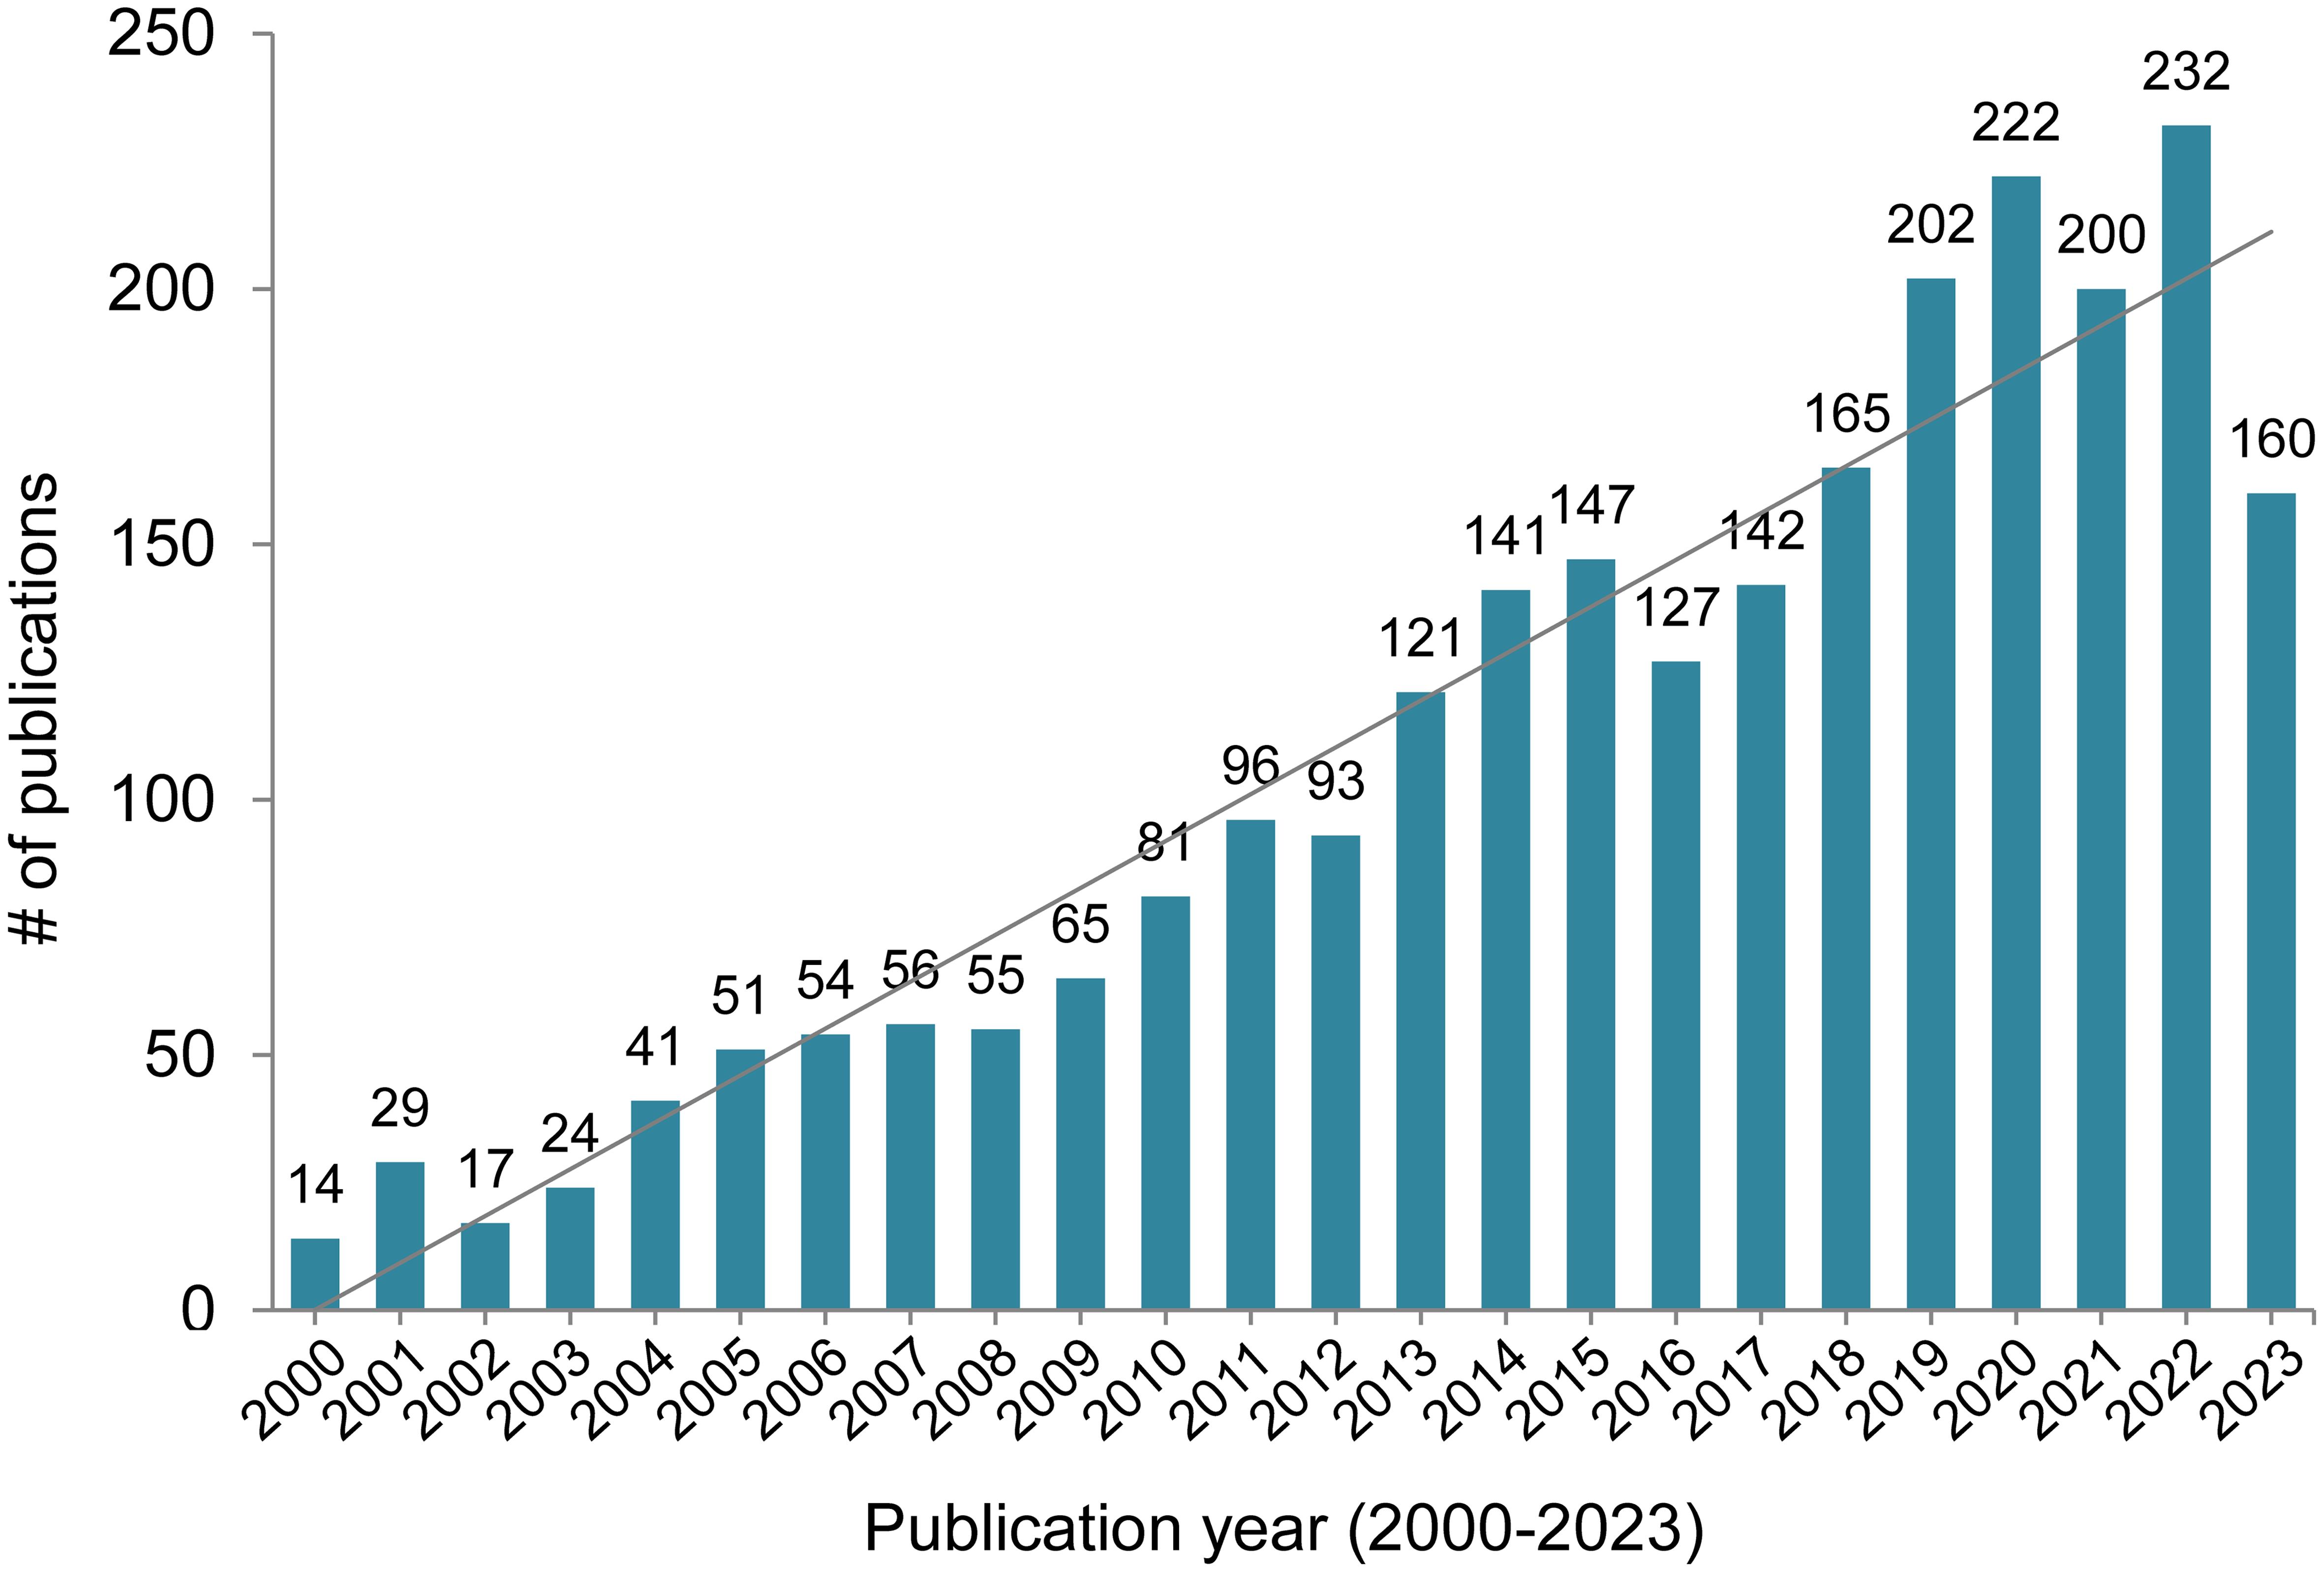 Evolutionary trend in the number of publications covering <italic>O. sinensis</italic> in the NCBI-PubMed.